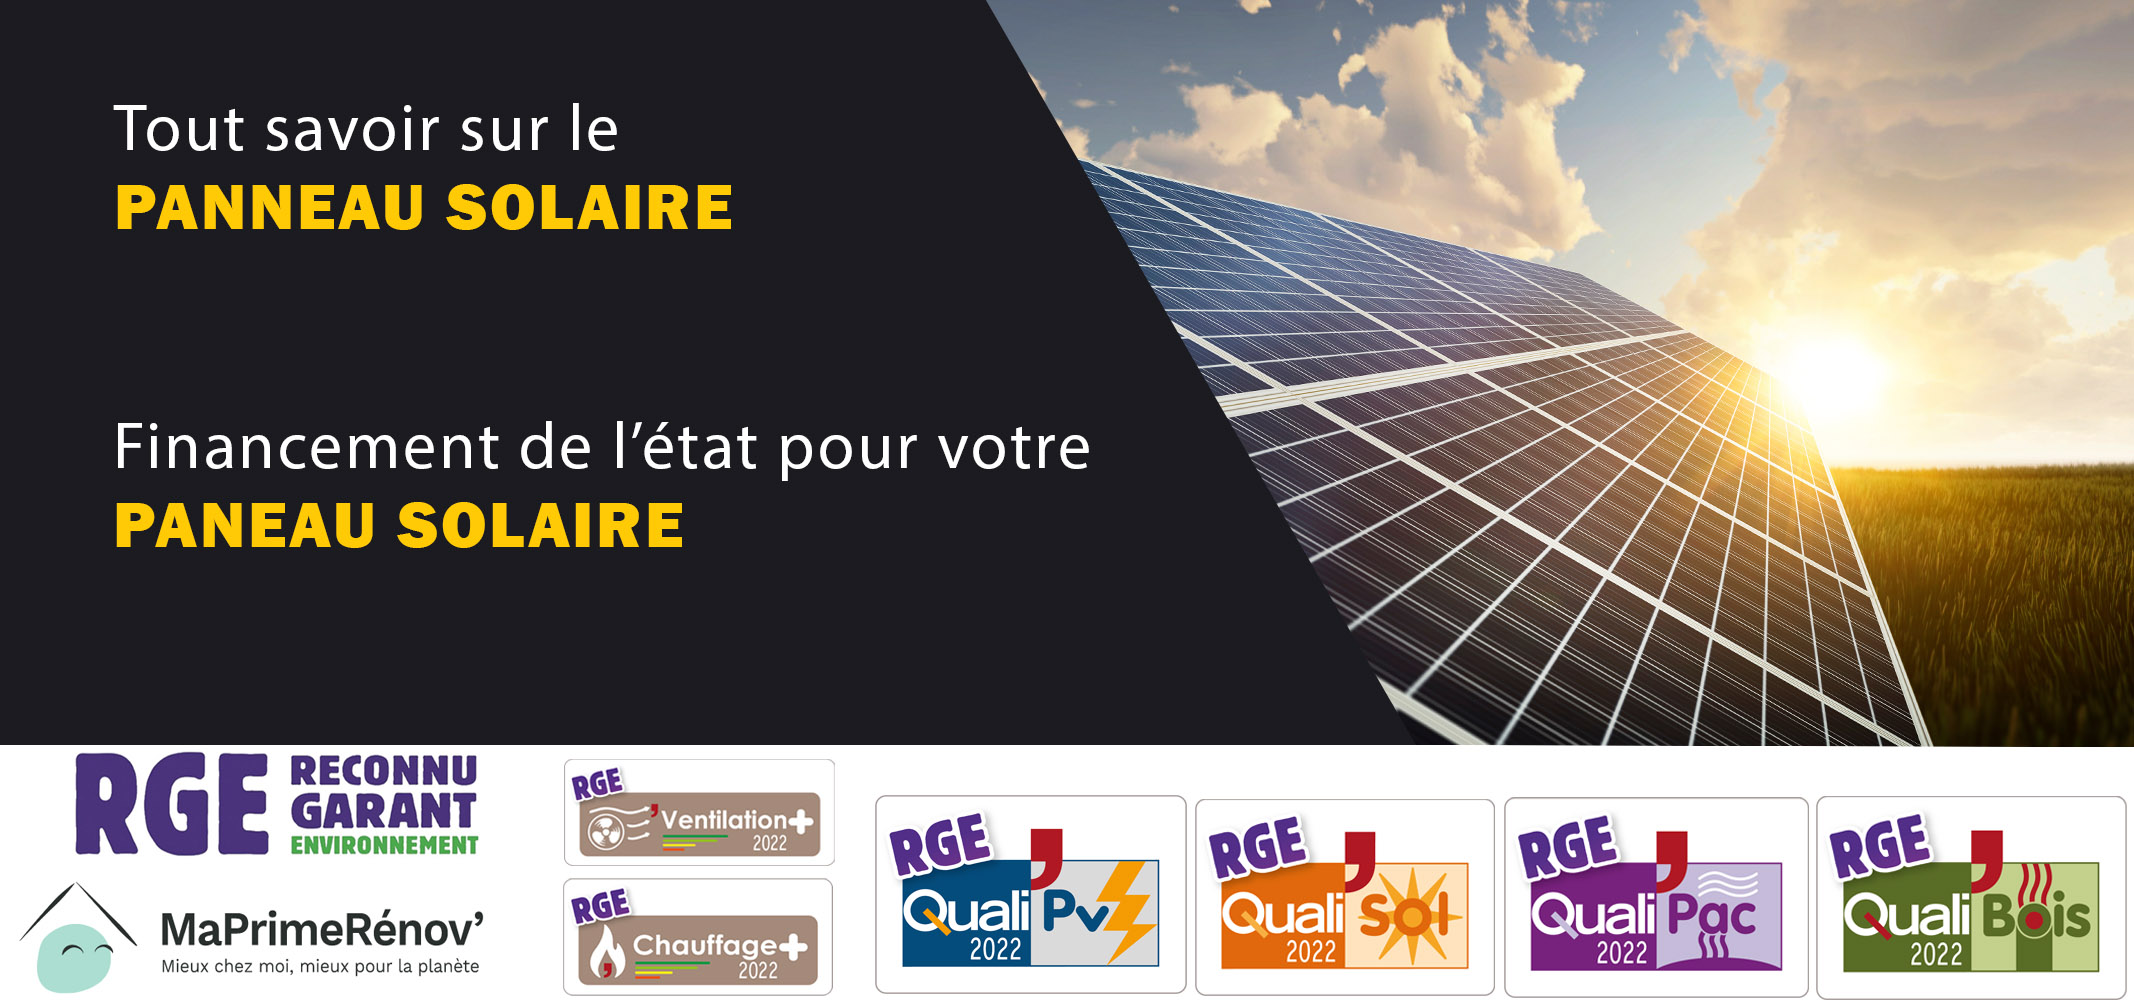 Artisan RGE Panneaux Solaires Neuilly sur Marne 93330